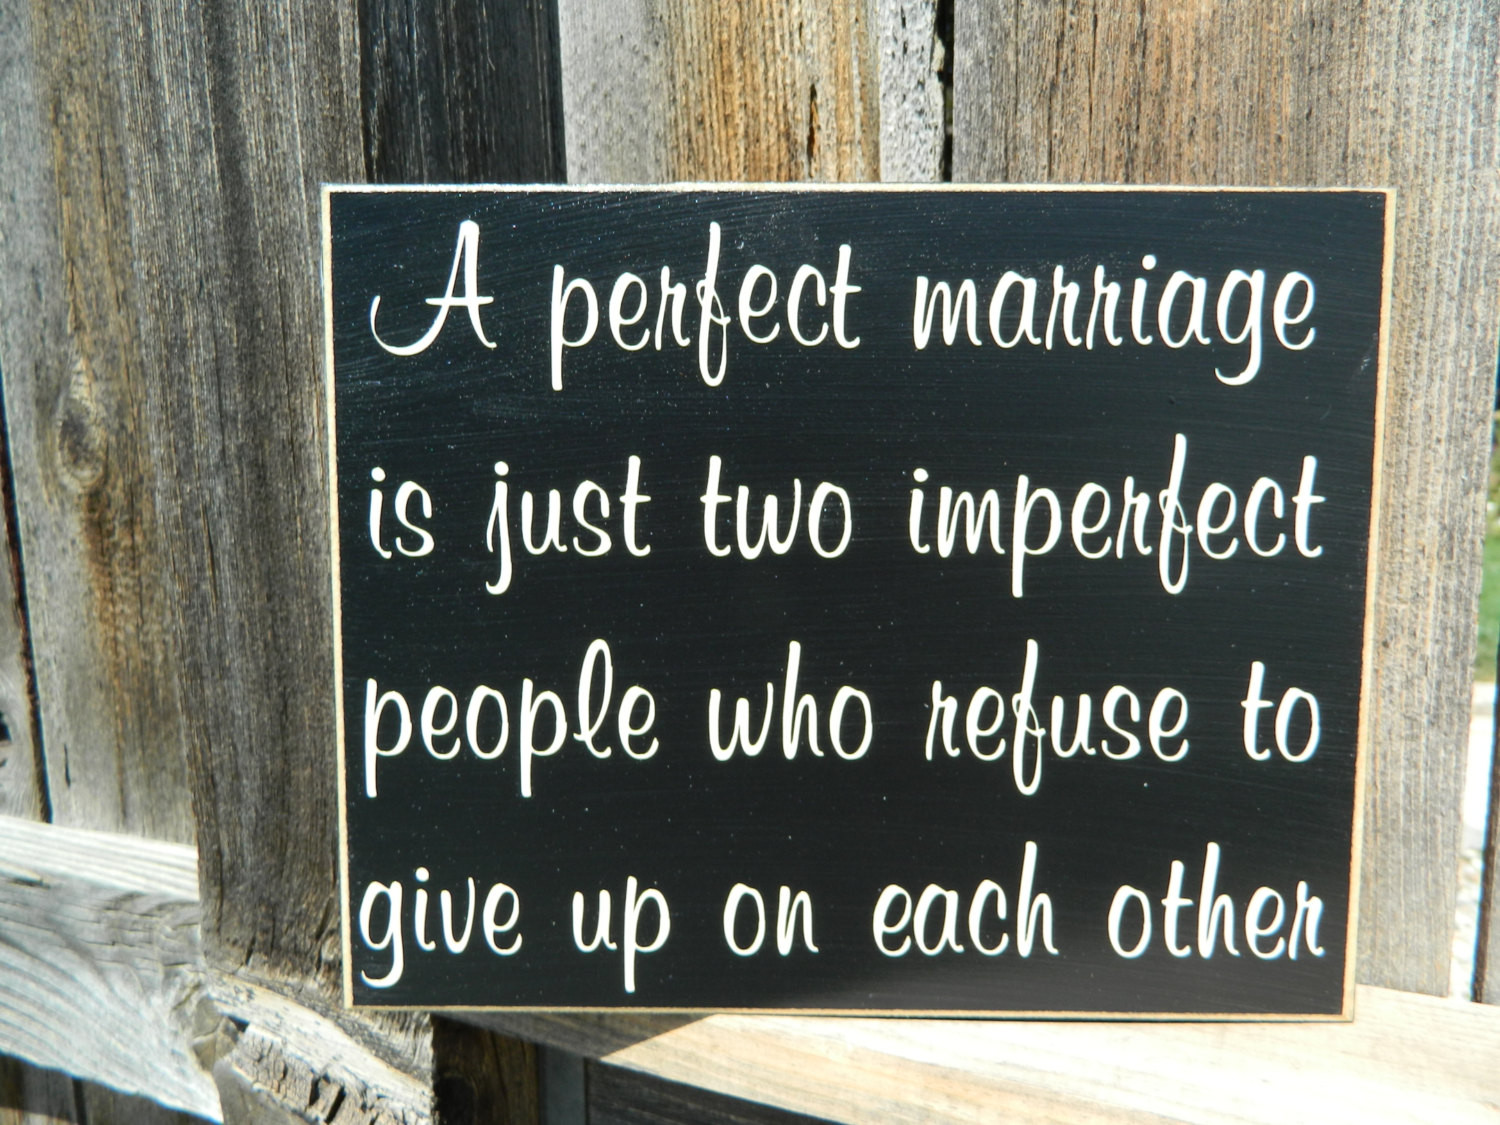 Quotes For Marriages
 Inspirational QuoteA perfect marriage wood sign